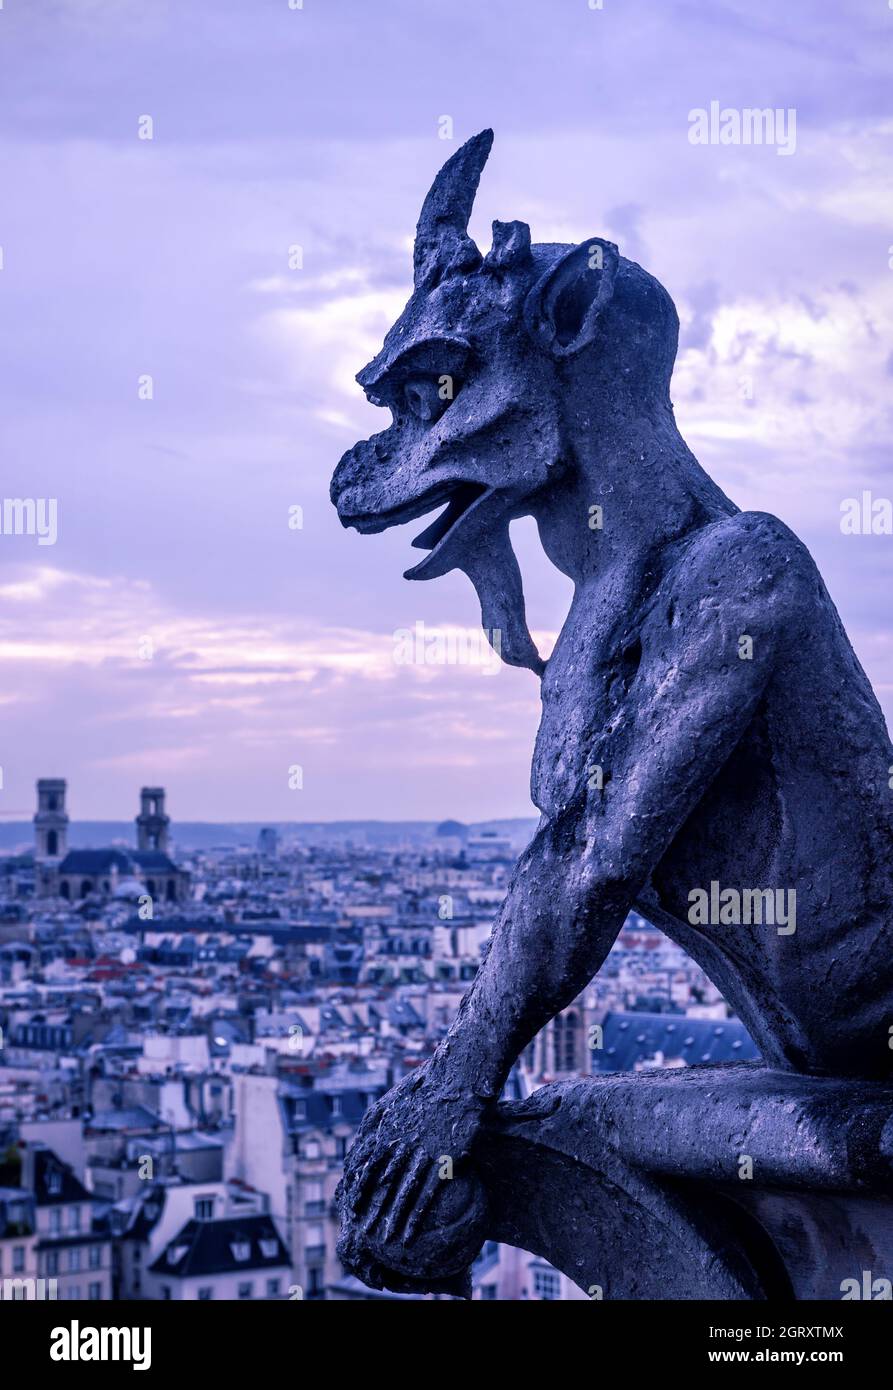 Gargoyle (chimera) of Notre Dame de Paris cathedral, France. It is landmark of Paris city. Vertical view of gothic demon statue at night, scary sculpt Stock Photo